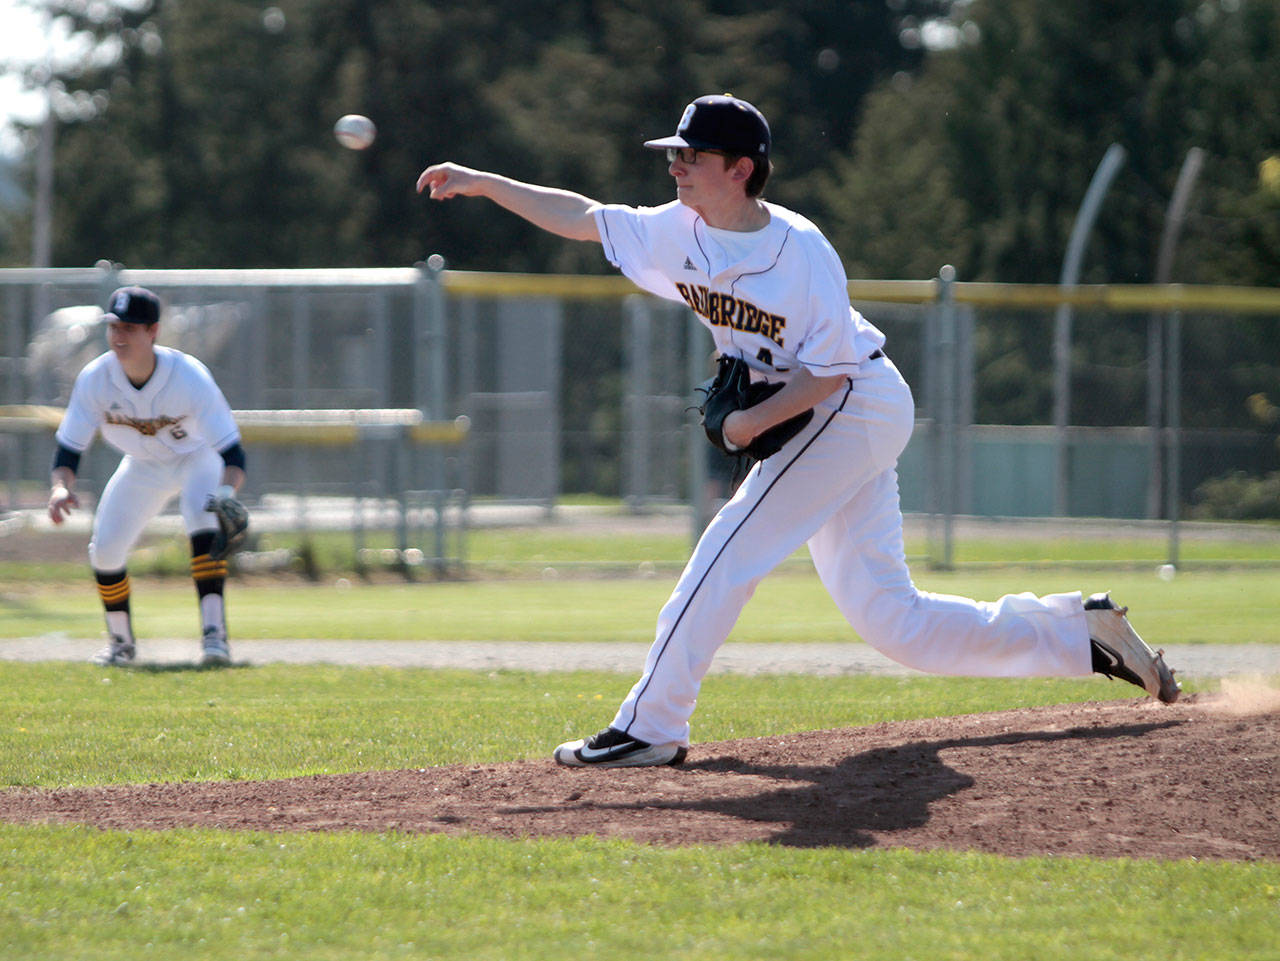 Luciano Marano | Bainbridge Island Review - Spartan senior pitcher James McMurray on the mound Monday. By his own count, the strong-armed Spartan threw 46 pitches in the game’s brisk five innings.